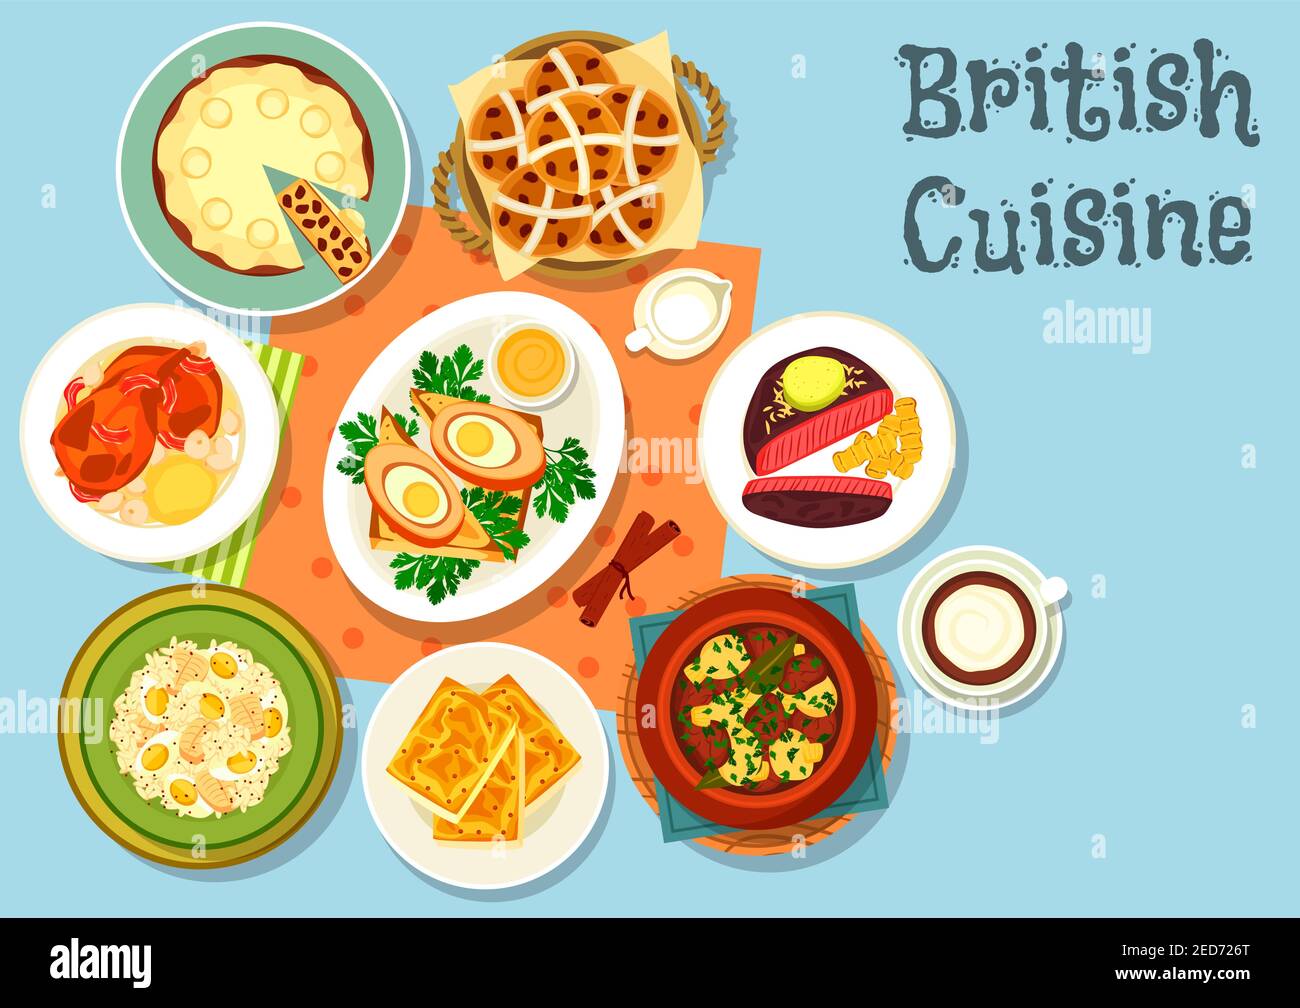 British cuisine main dishes with snack food icon of cheese toast, beef steak, fish rice salad, irish vegetable meat stew, scotch egg wrapped in sausag Stock Vector